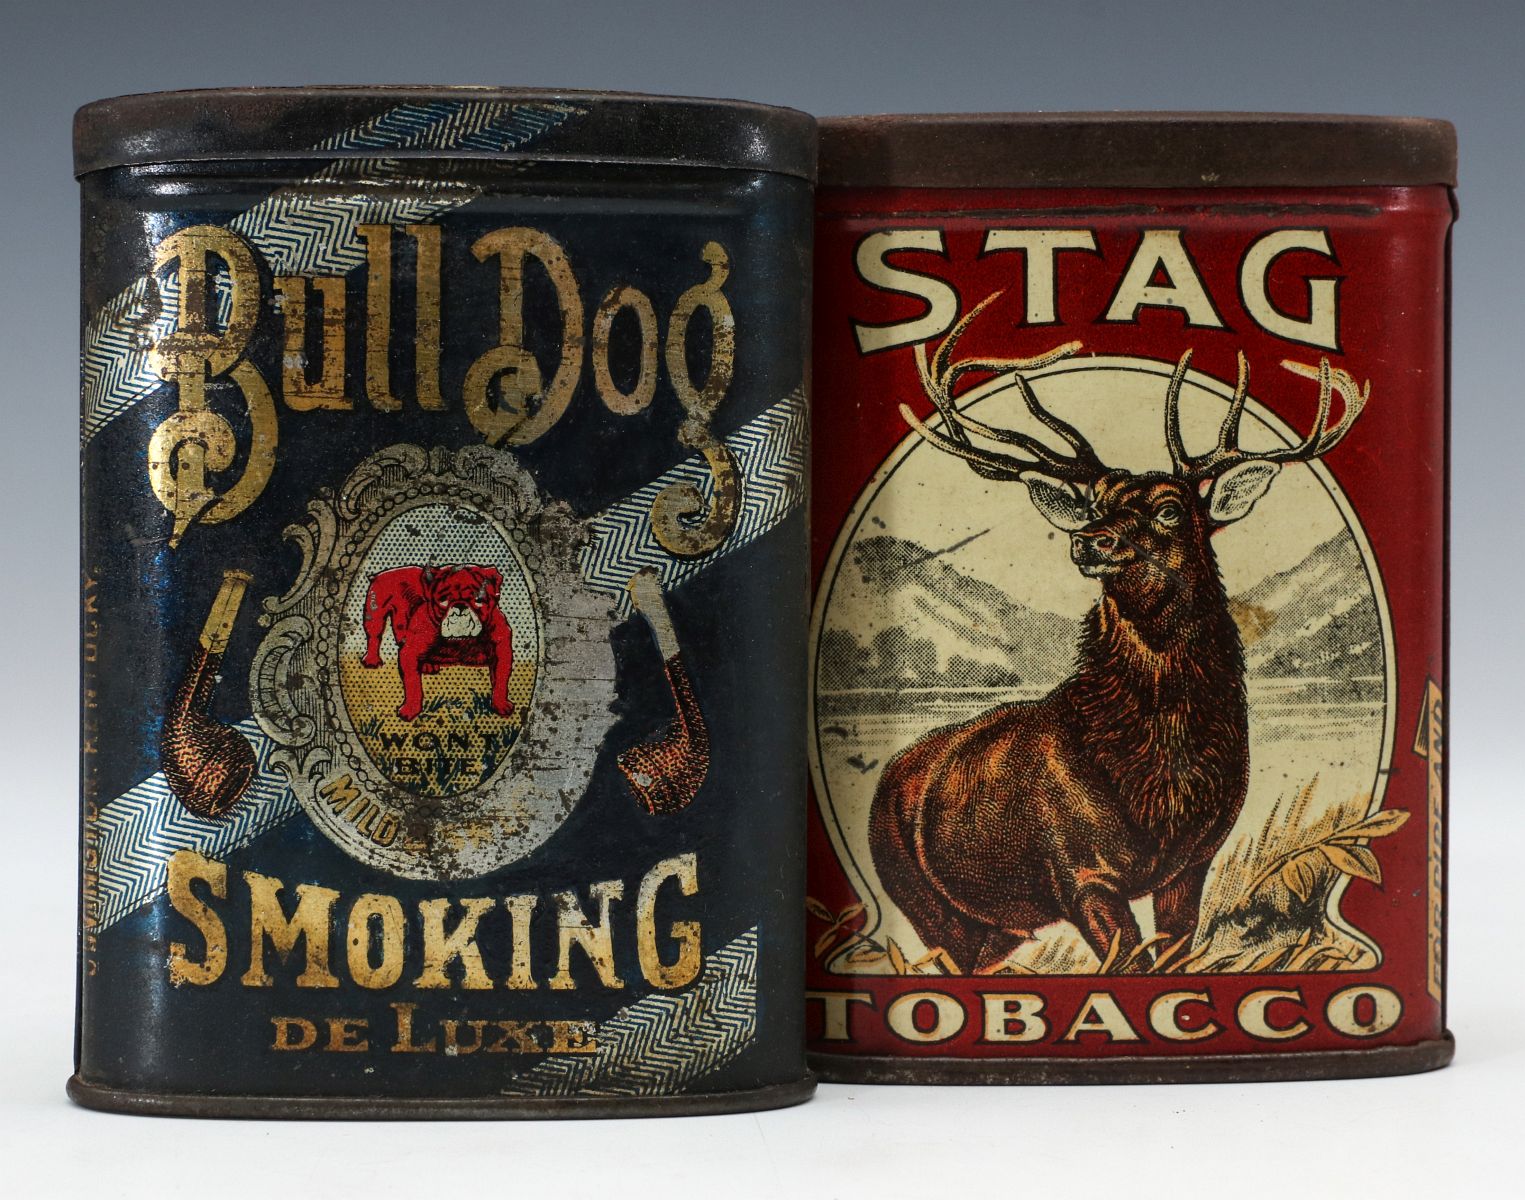 BULL DOG AND STAG BRANDS TOBACCO POCKET TINS